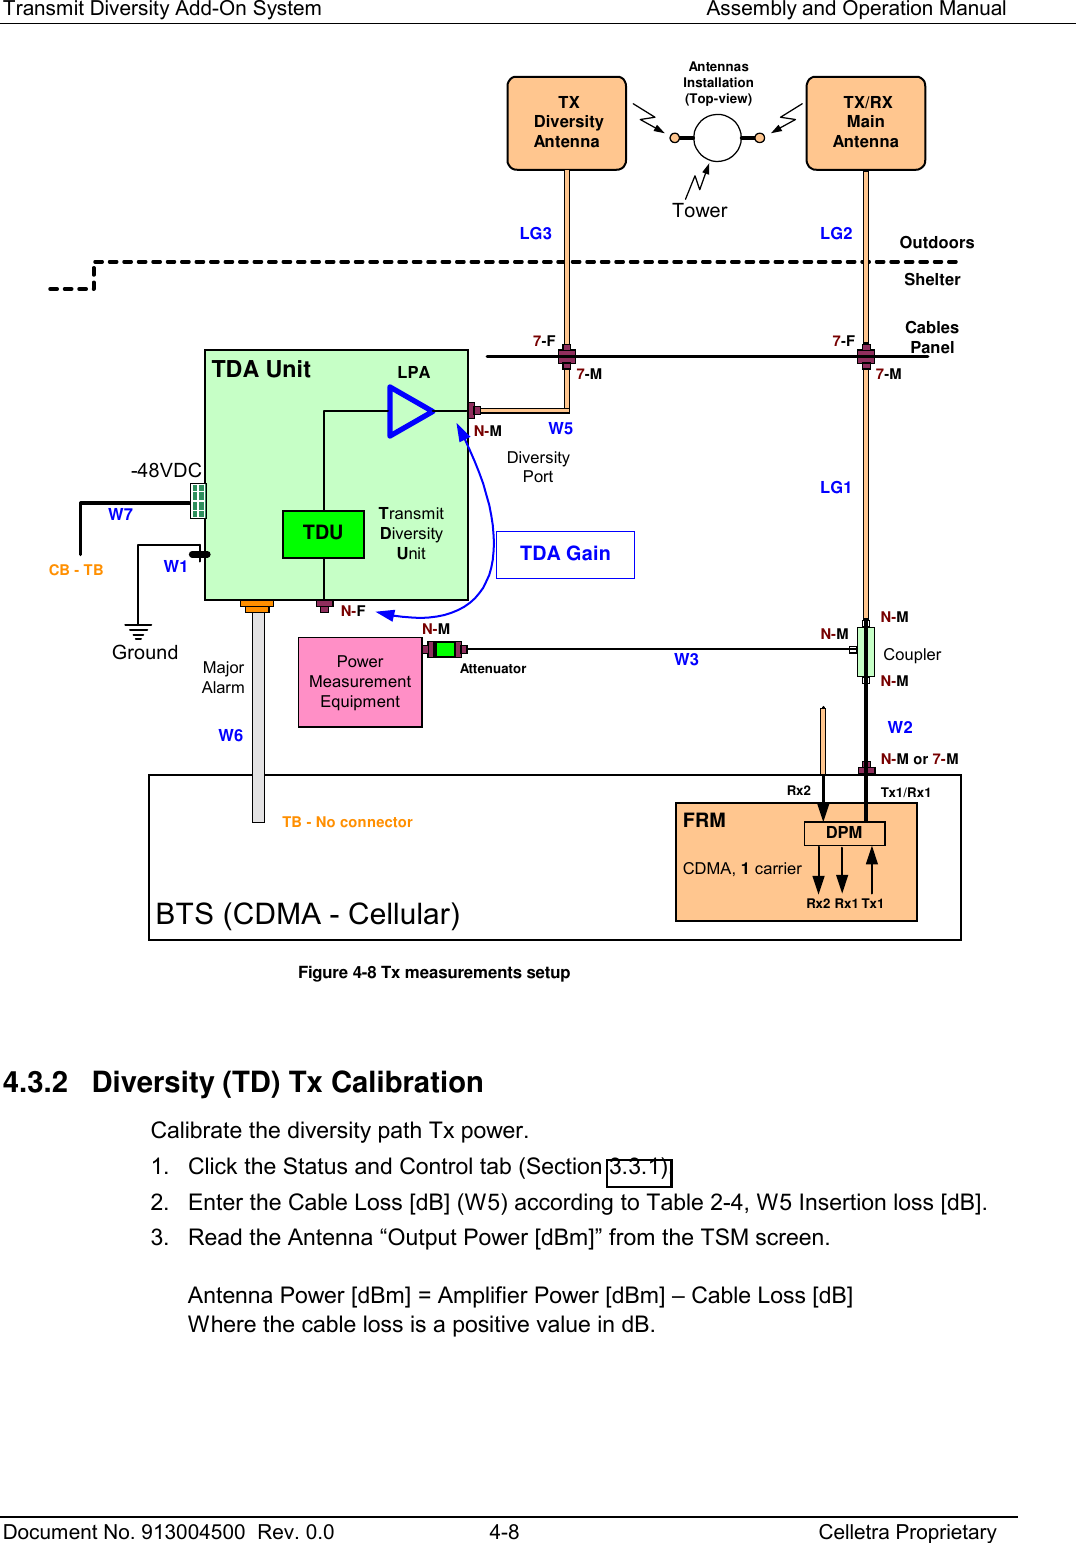 Transmit Diversity Add-On System   Assembly and Operation Manual  Document No. 913004500  Rev. 0.0  4-8  Celletra Proprietary  TDA UnitBTS (CDMA - Cellular)TransmitDiversityUnit TX DiversityAntennaTx1/Rx1OutdoorsShelterFRMCouplerDPMRx2 Rx1 Tx1CDMA, 1 carrierTDU-48VDCMajorAlarmN-MN-MN-MN-MTB - No connectorW1W2W37-F7-MW5W6N-M or 7-M7-F7-MCablesPanelGroundLPACB - TBW7 TX/RXMainAntennaAntennasInstallation(Top-view)TowerRx2DiversityPortAttenuatorN-MN-FPowerMeasurementEquipmentLG3 LG2LG1TDA Gain Figure  4-8 Tx measurements setup  4.3.2  Diversity (TD) Tx Calibration Calibrate the diversity path Tx power. 1.  Click the Status and Control tab (Section  3.3.1). 2.  Enter the Cable Loss [dB] (W5) according to Table 2-4, W5 Insertion loss [dB]. 3.  Read the Antenna “Output Power [dBm]” from the TSM screen.  Antenna Power [dBm] = Amplifier Power [dBm] – Cable Loss [dB] Where the cable loss is a positive value in dB.  